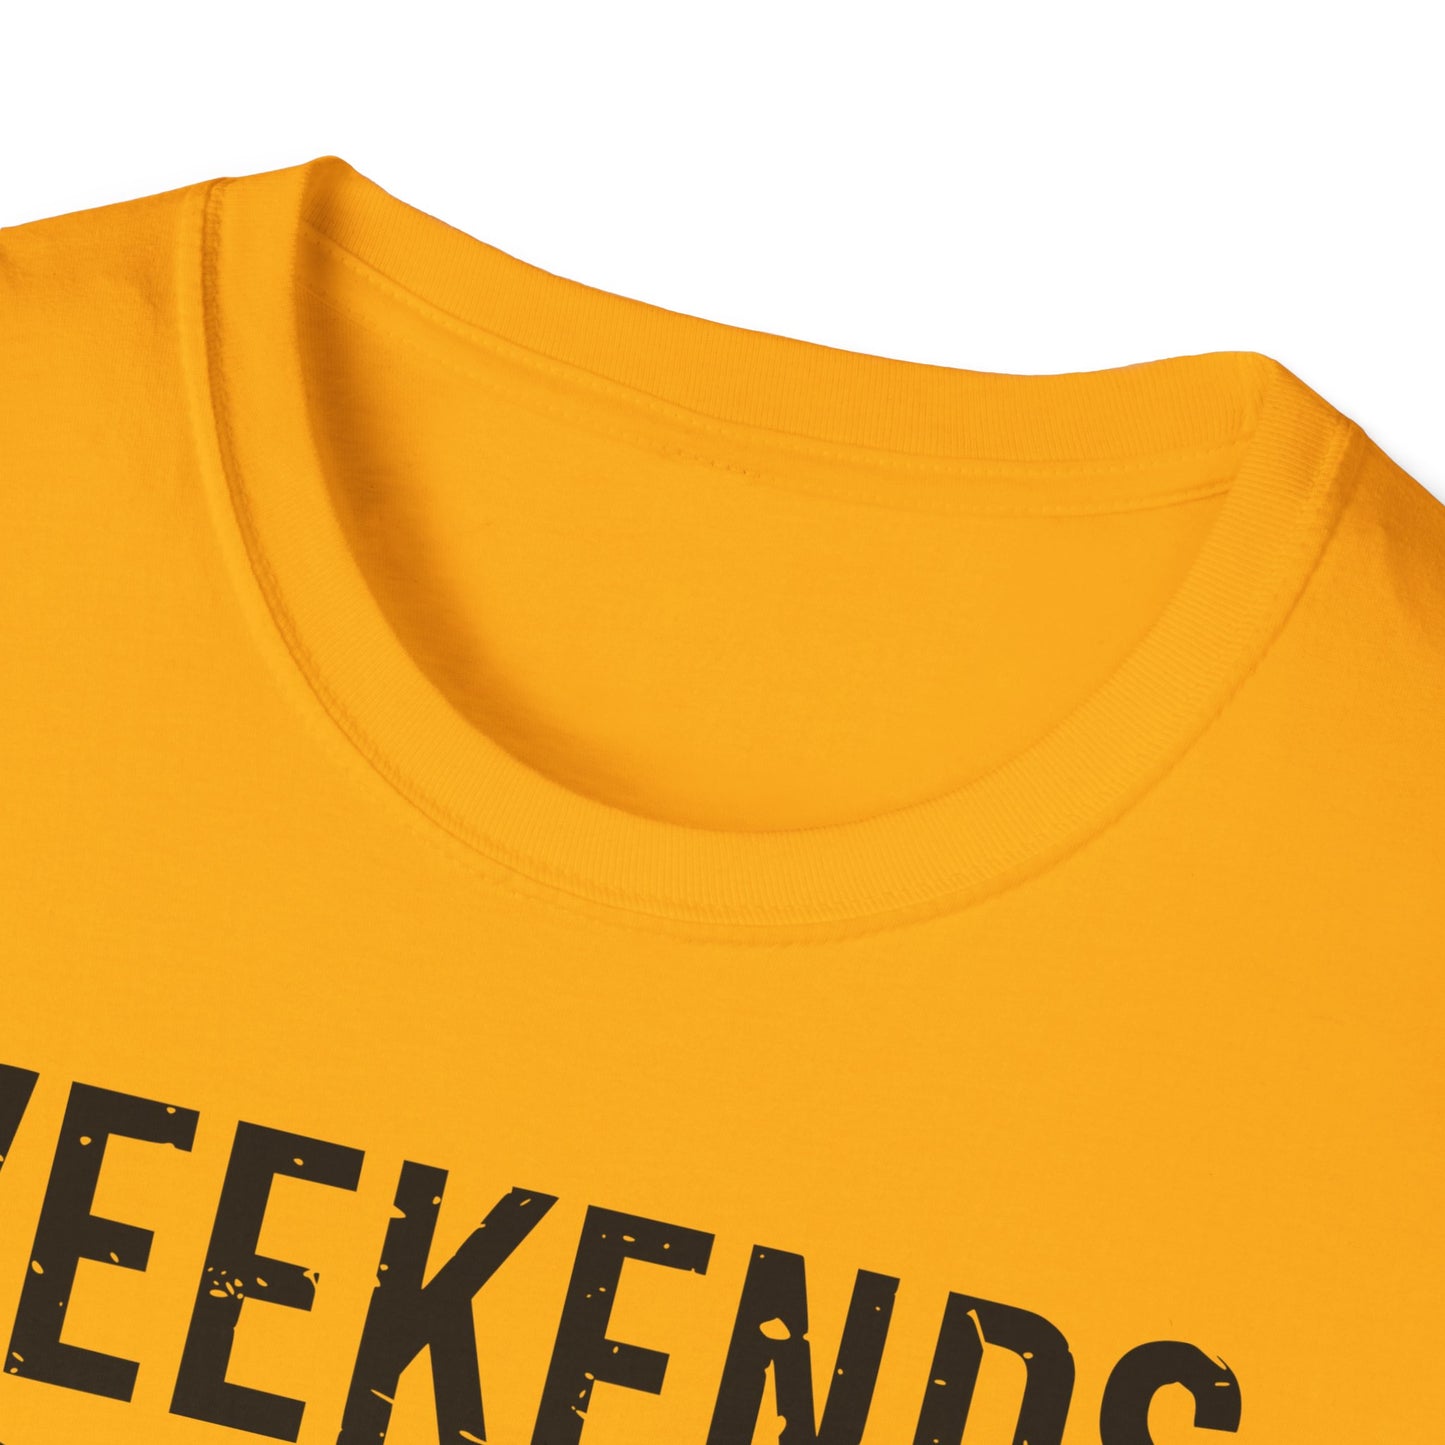 Weekends Coffee Sports - Unisex Softstyle T-Shirt